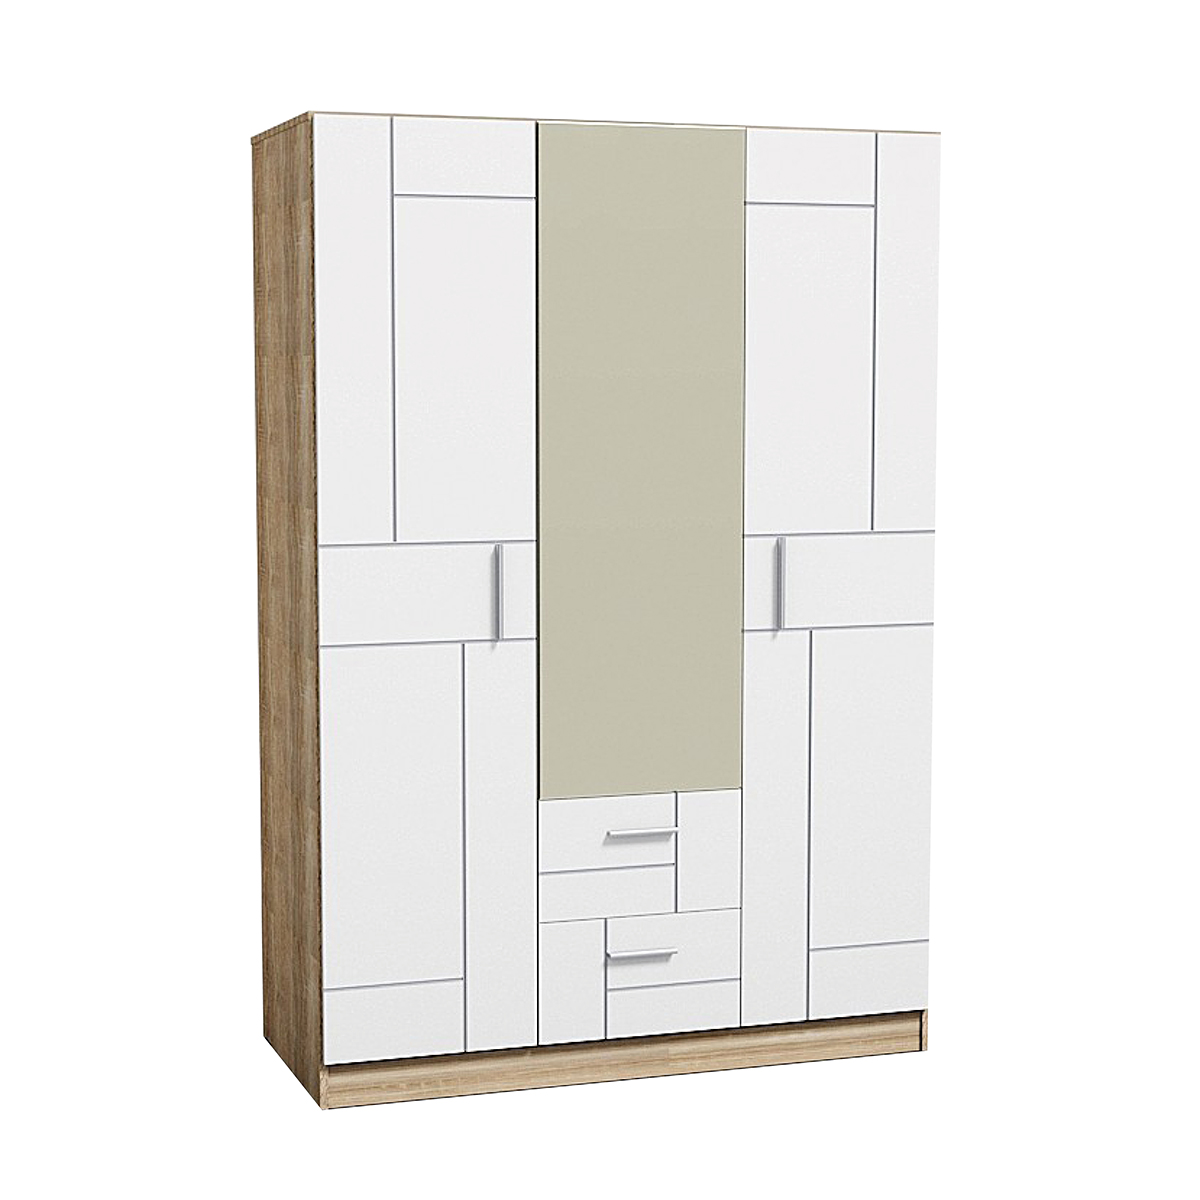 36027::XHB-745::A Sure wardrobe with 4 swing glass doors and 2 drawers. Dimension (WxDxH) cm : 163.8x62x220. Available in Oak SURE Wardrobes SURE Wardrobes SURE Wardrobes SURE Wardrobes SURE Wardrobes SURE Wardrobes SURE Wardrobes